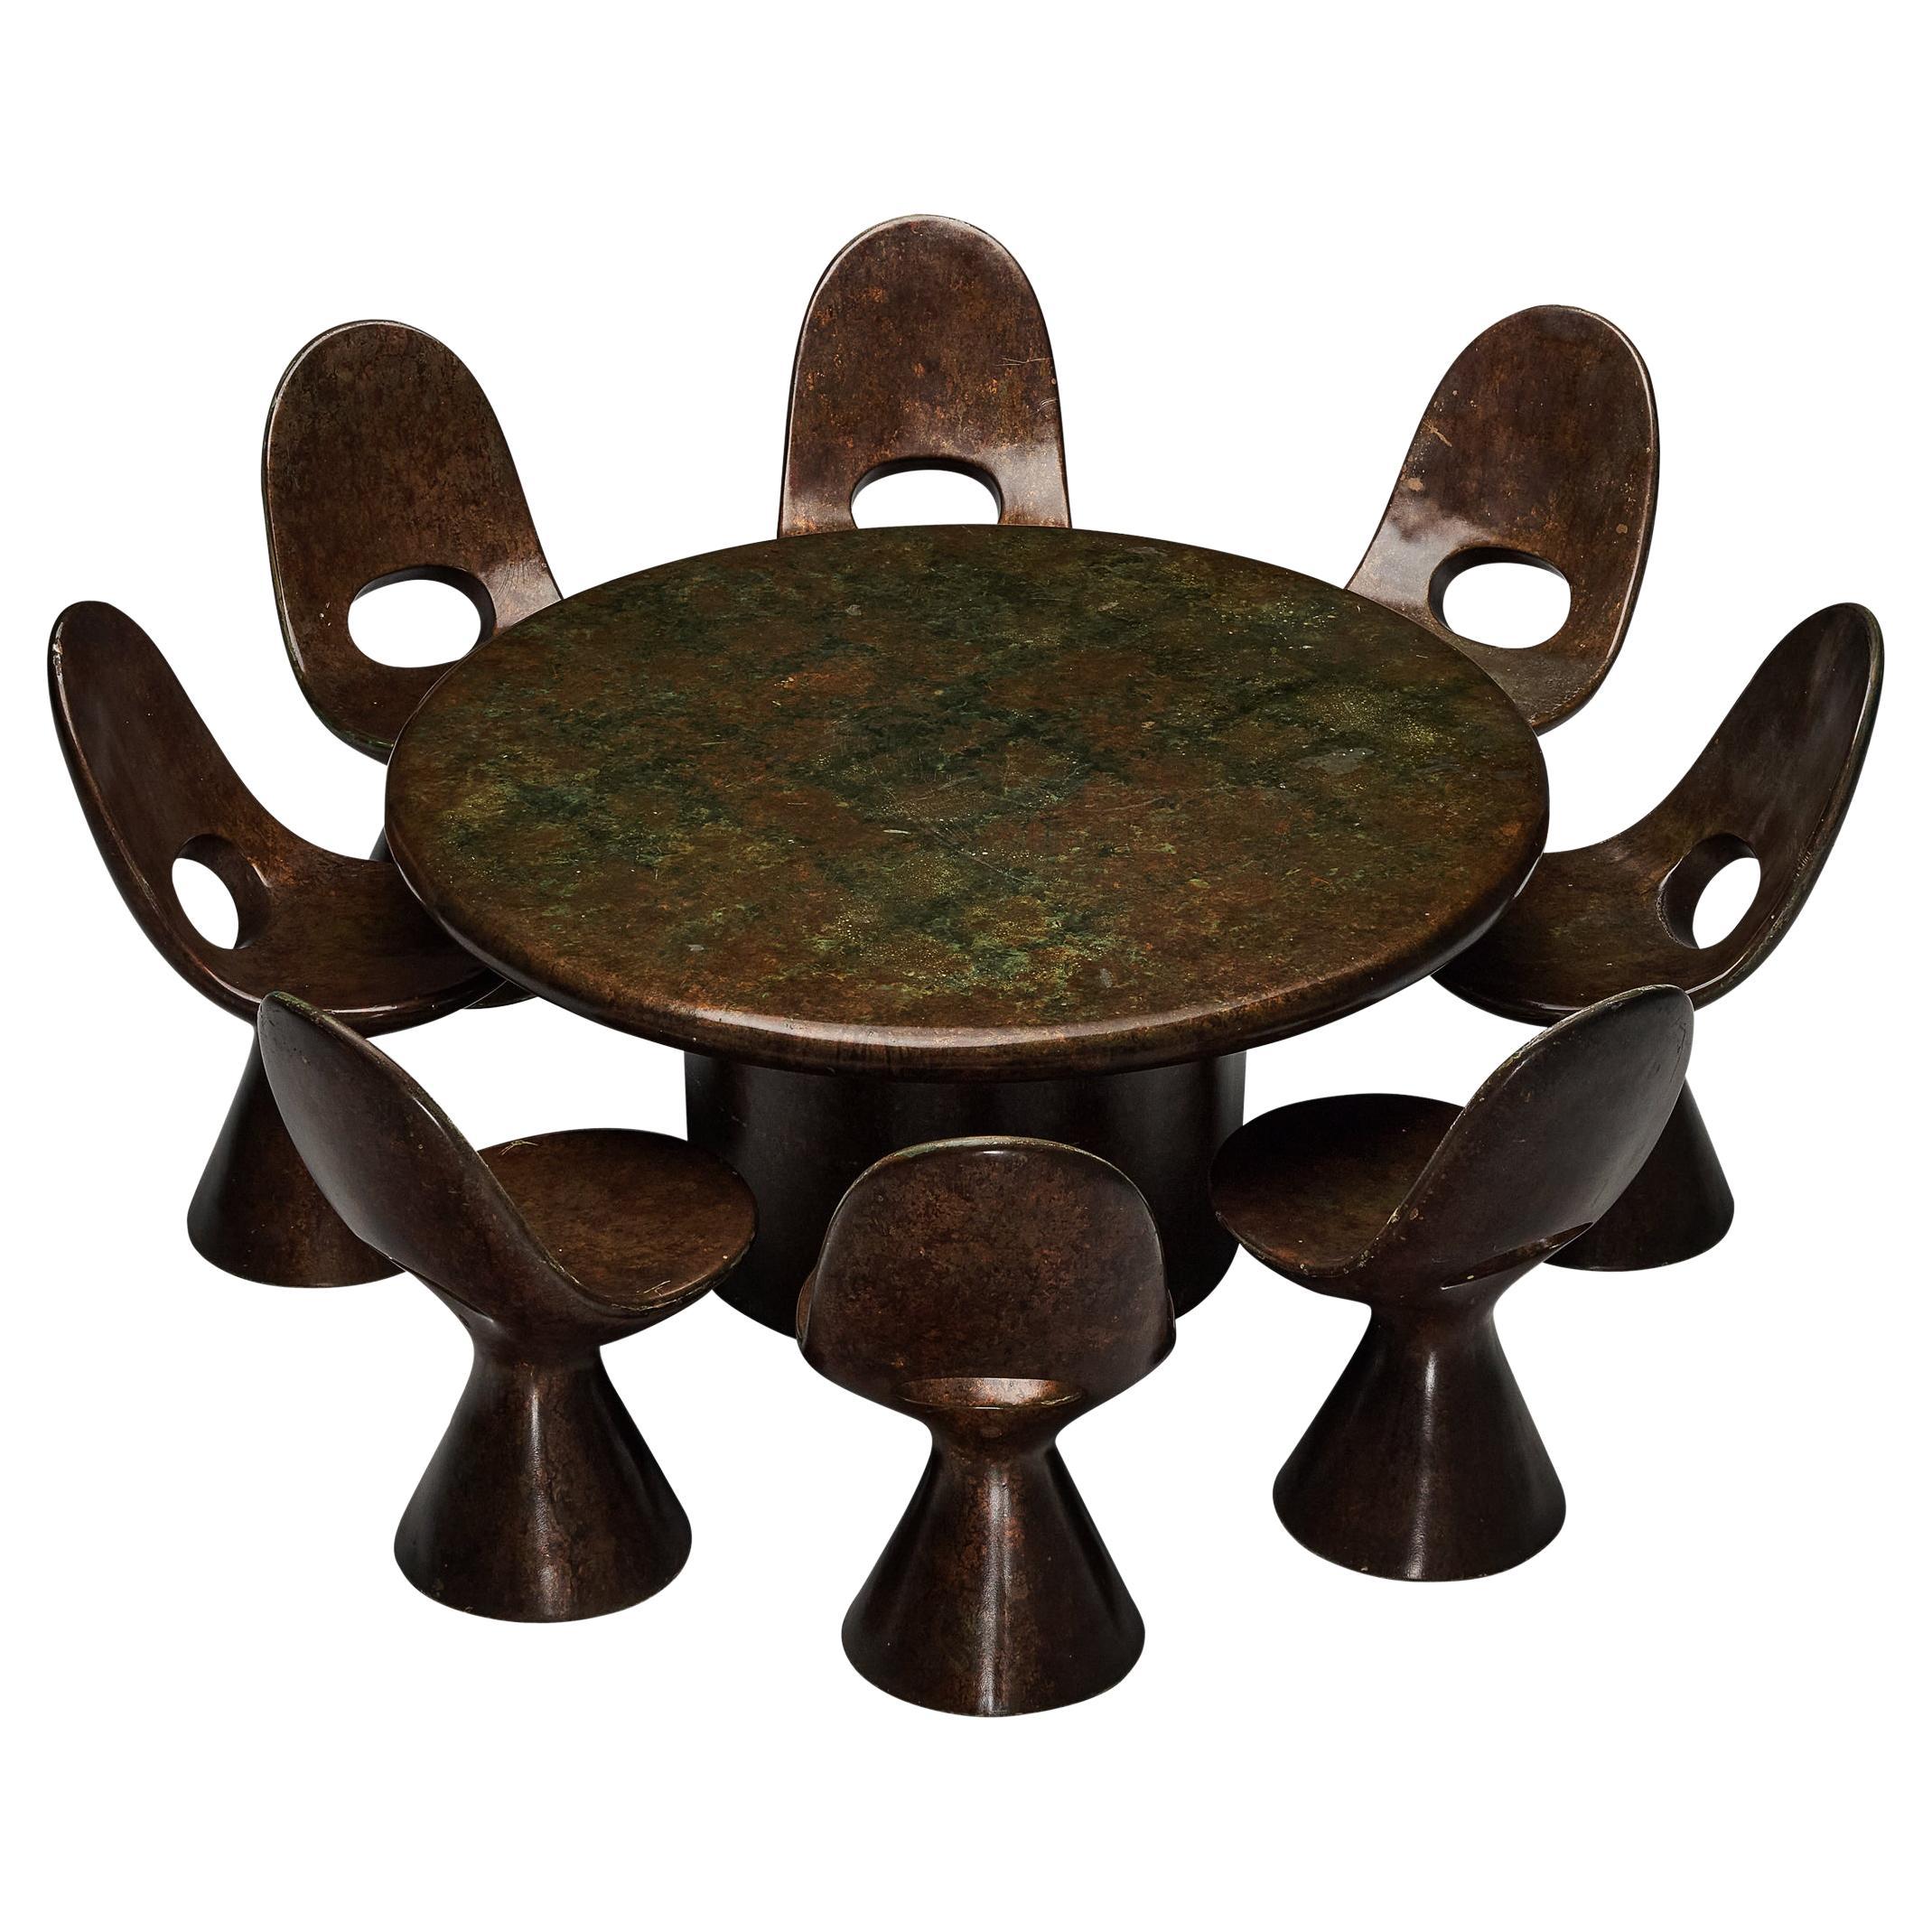 Rare Italian Sculptural Dining Room Set with Iridescent Surface 